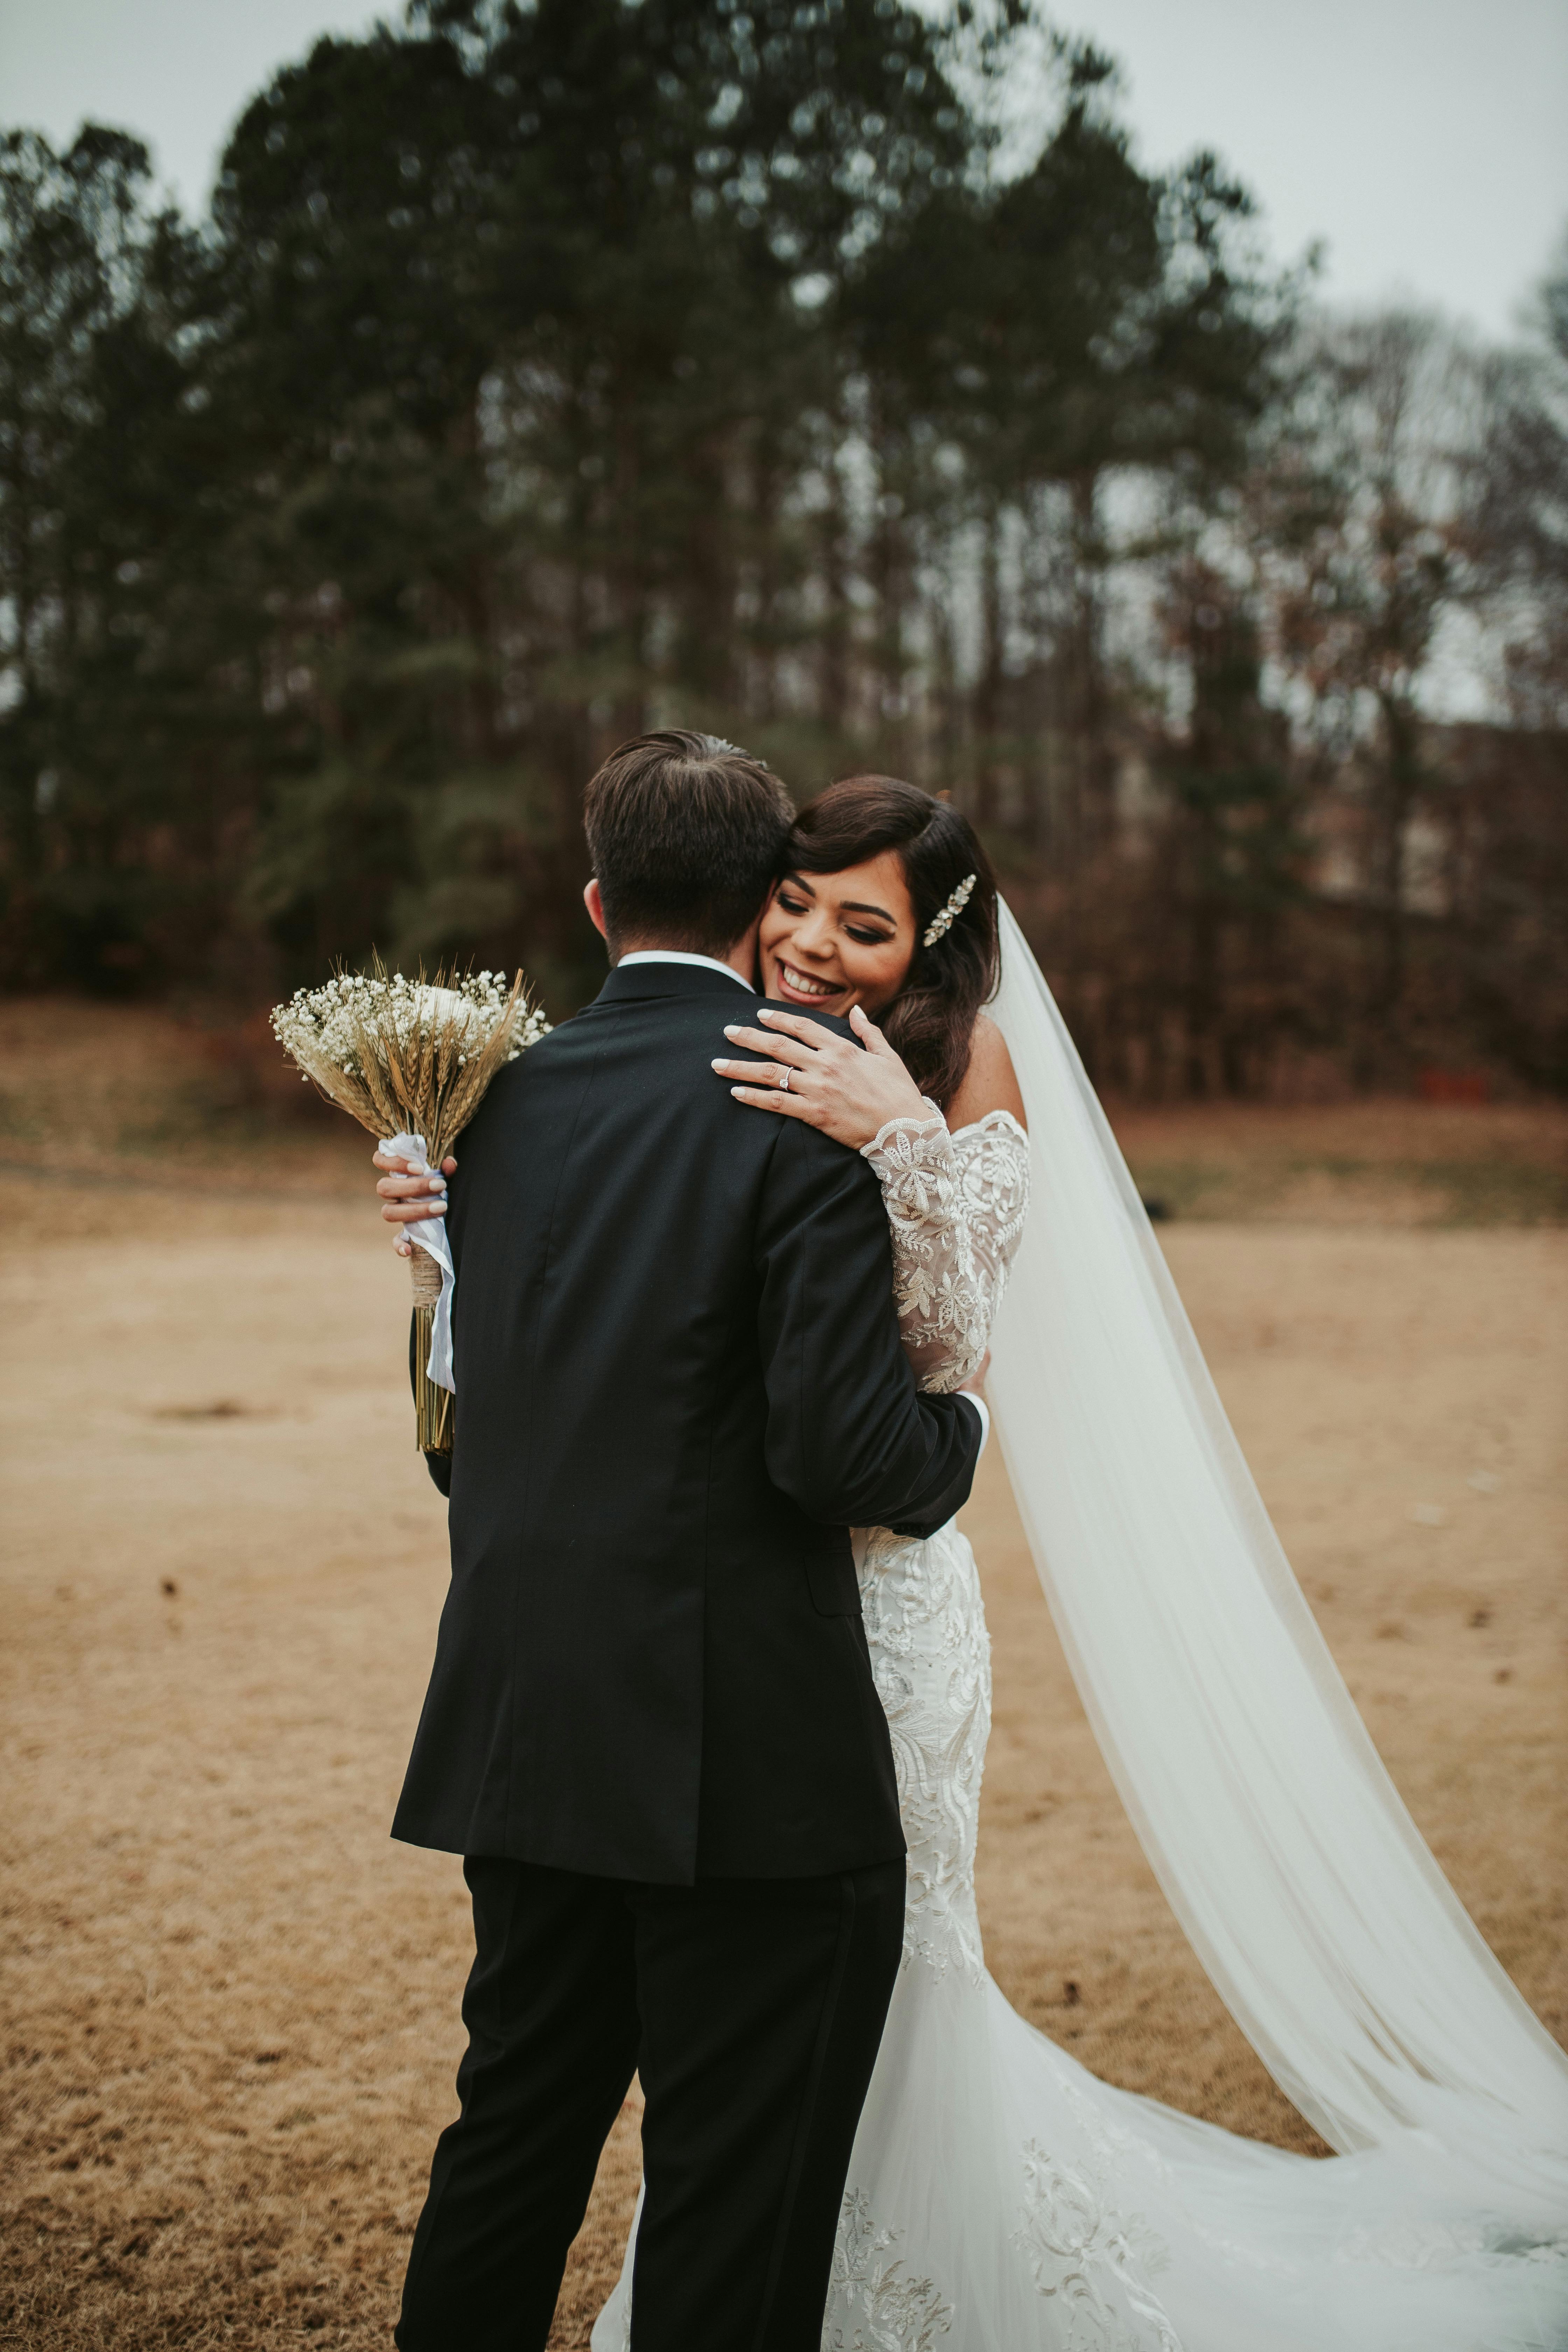 A newlywed couple embracing | Source: Pexels